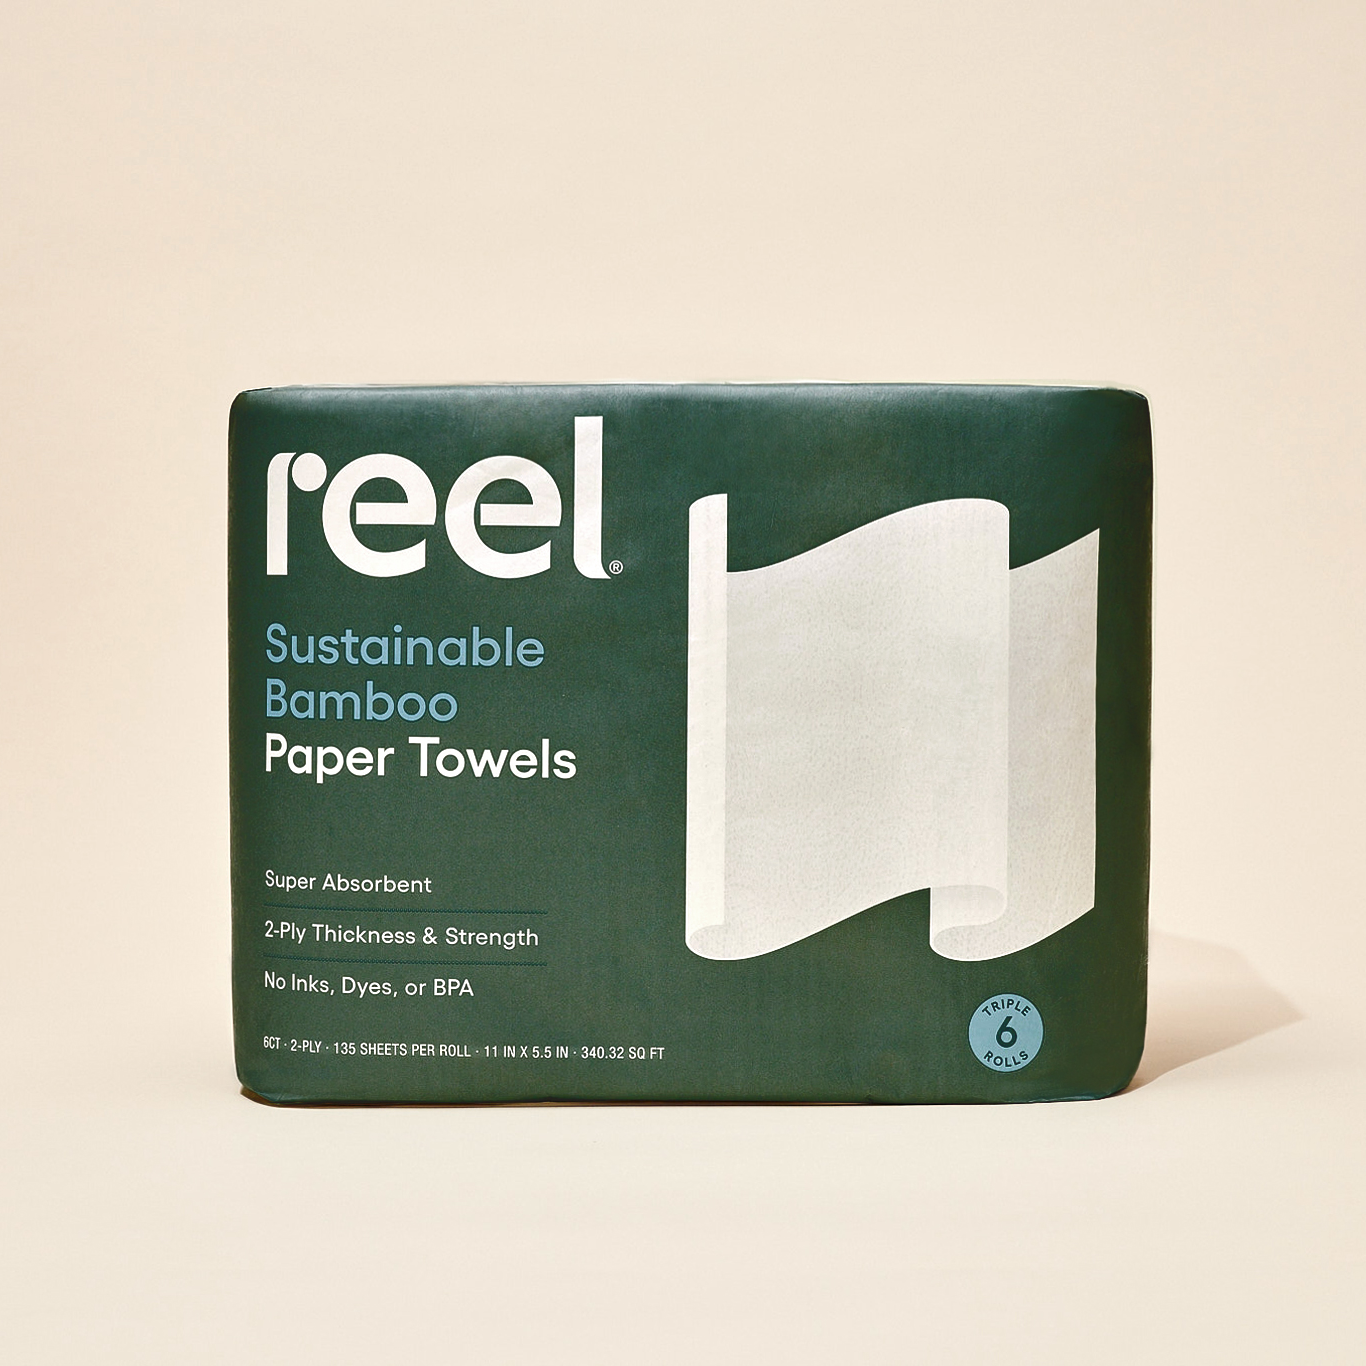 Reel- The Bamboo Based Sustainable Toilet Paper